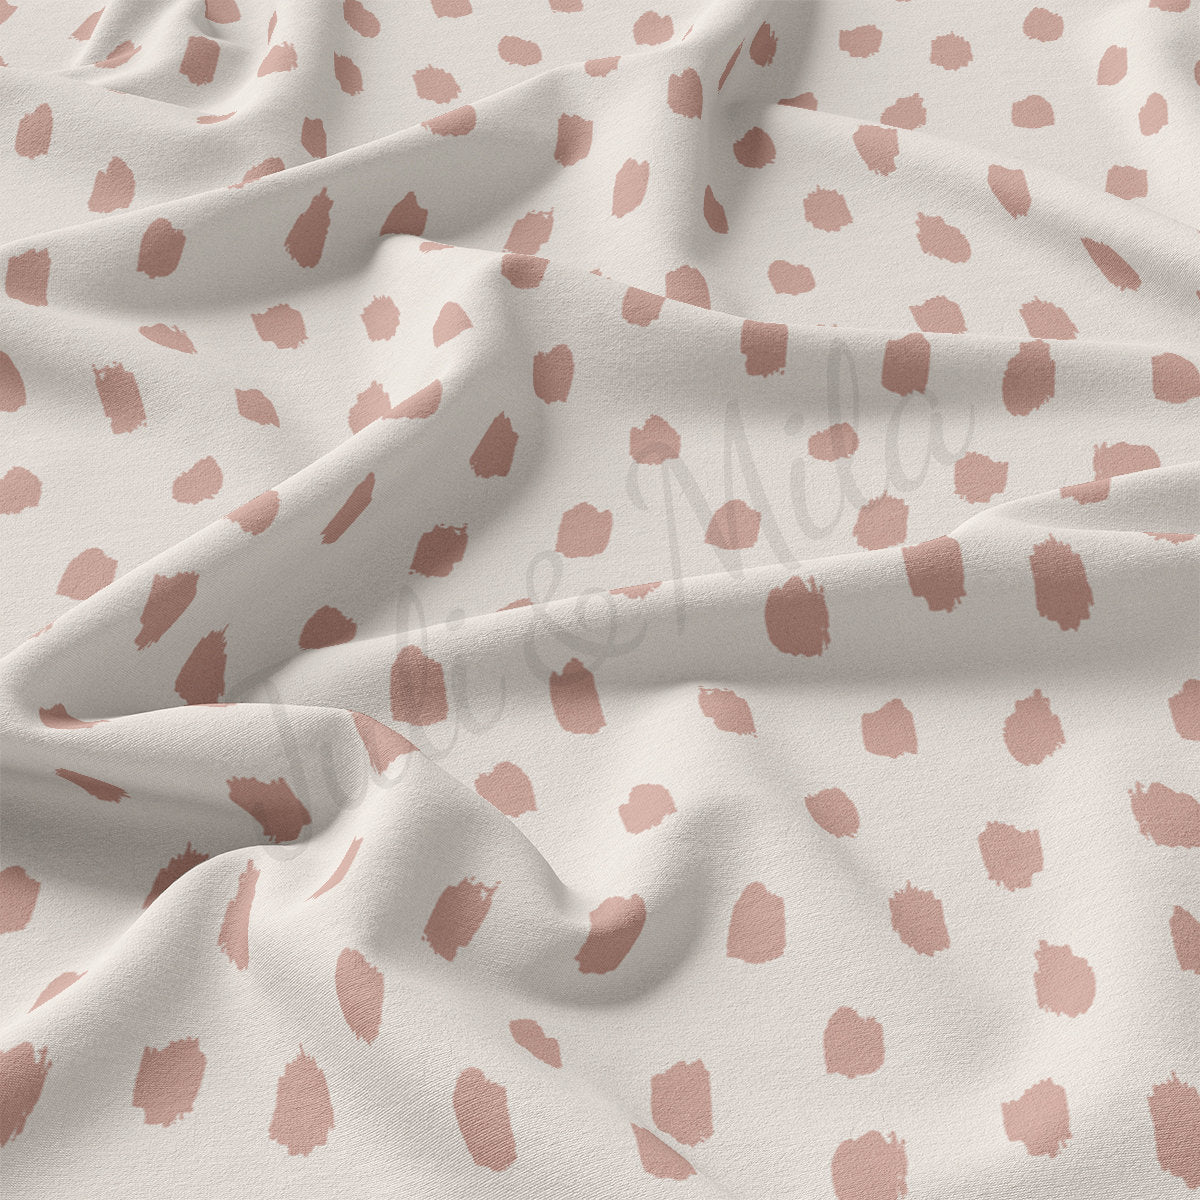 DBP Fabric Double Brushed Polyester DBP2417